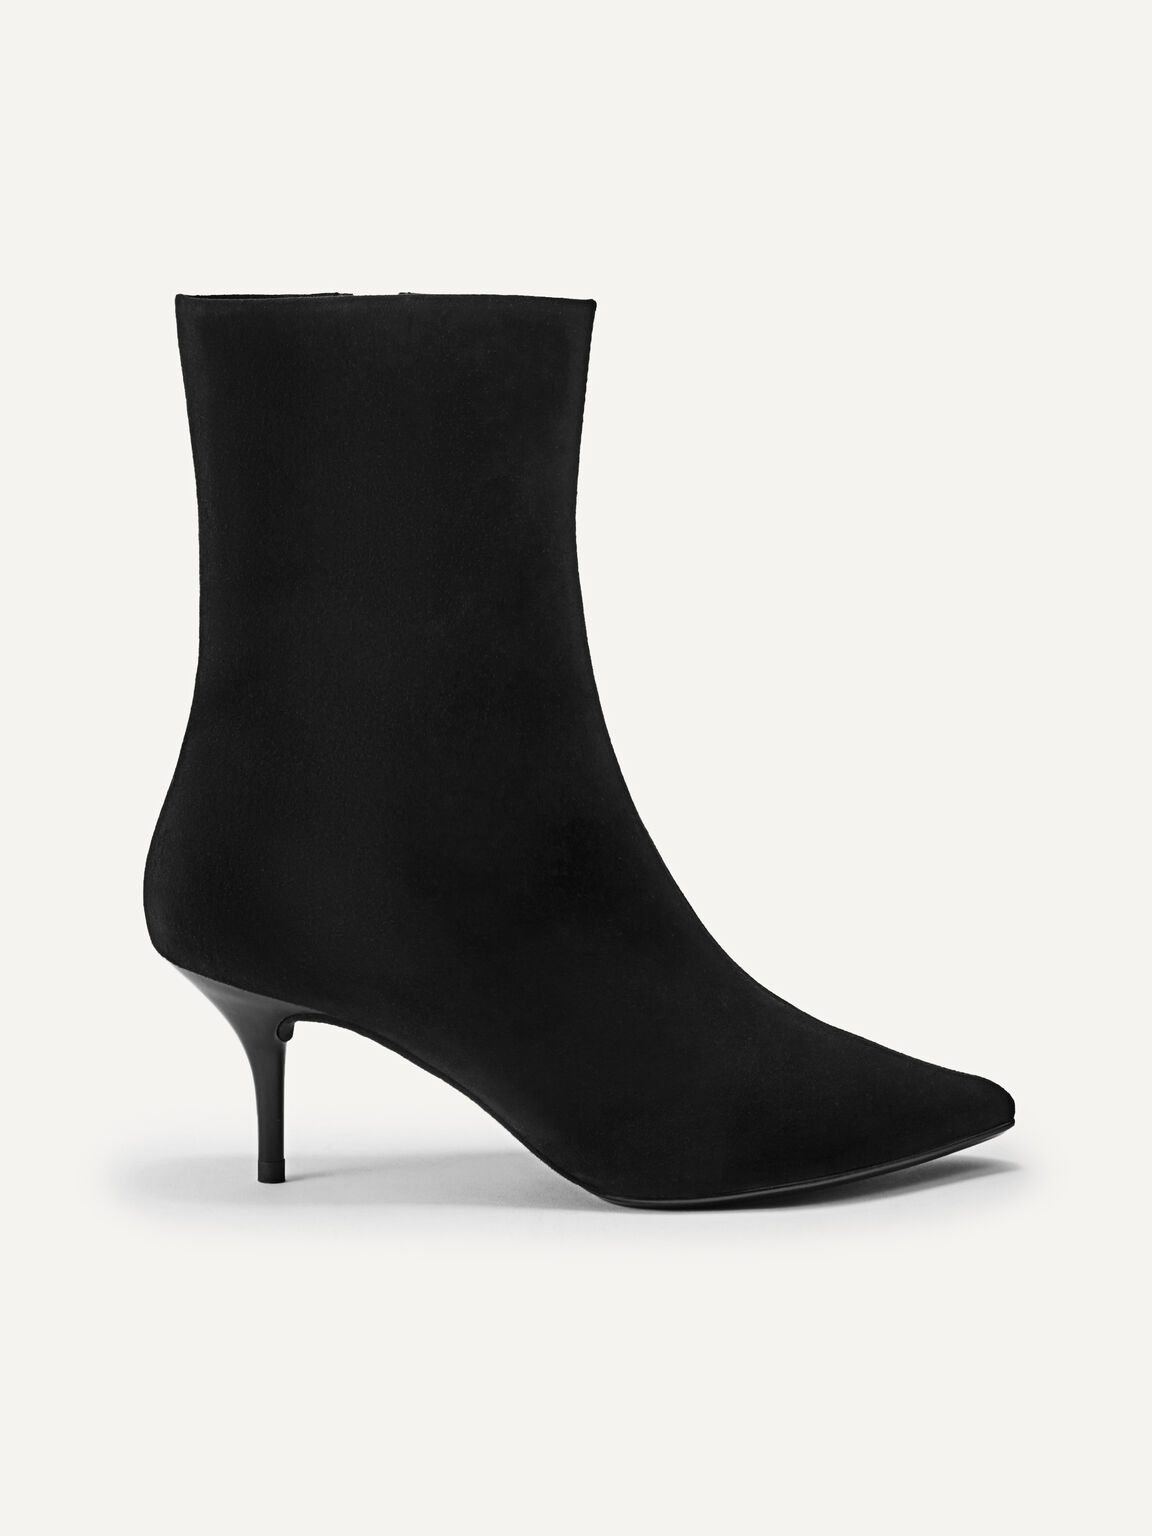 Suede Leather Ankle Boots, Black, hi-res